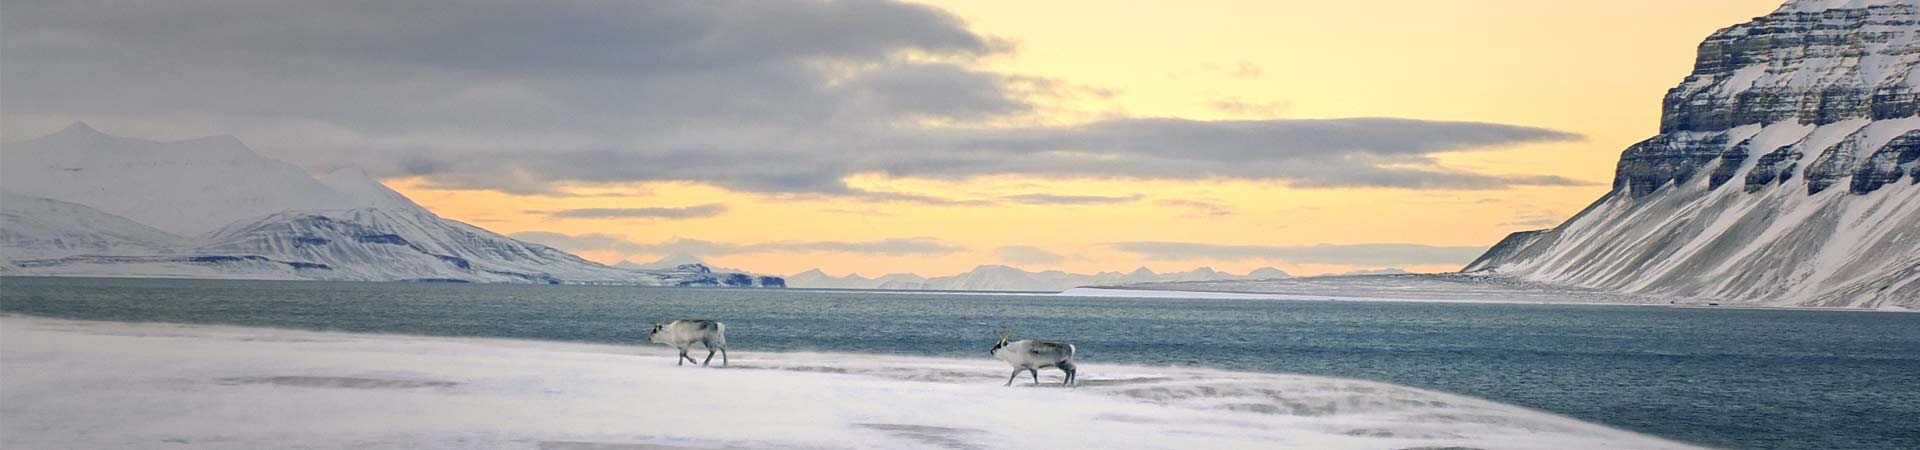 Image showing reindeer on an Arctic fjord 